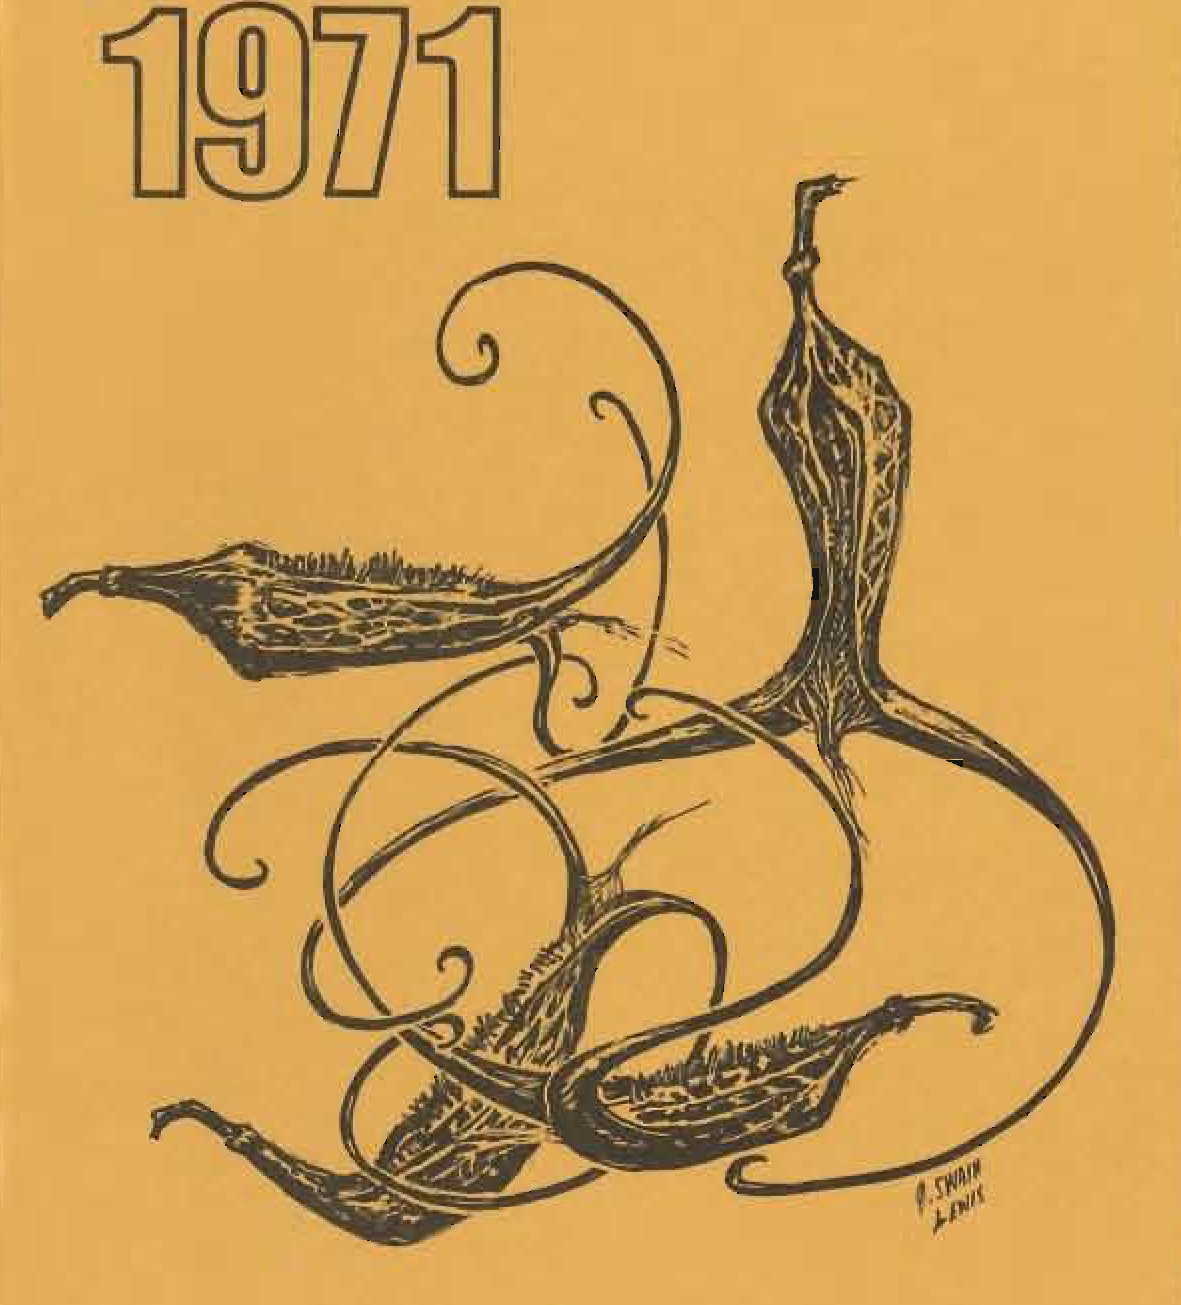 From the 1971 Festival Brochure